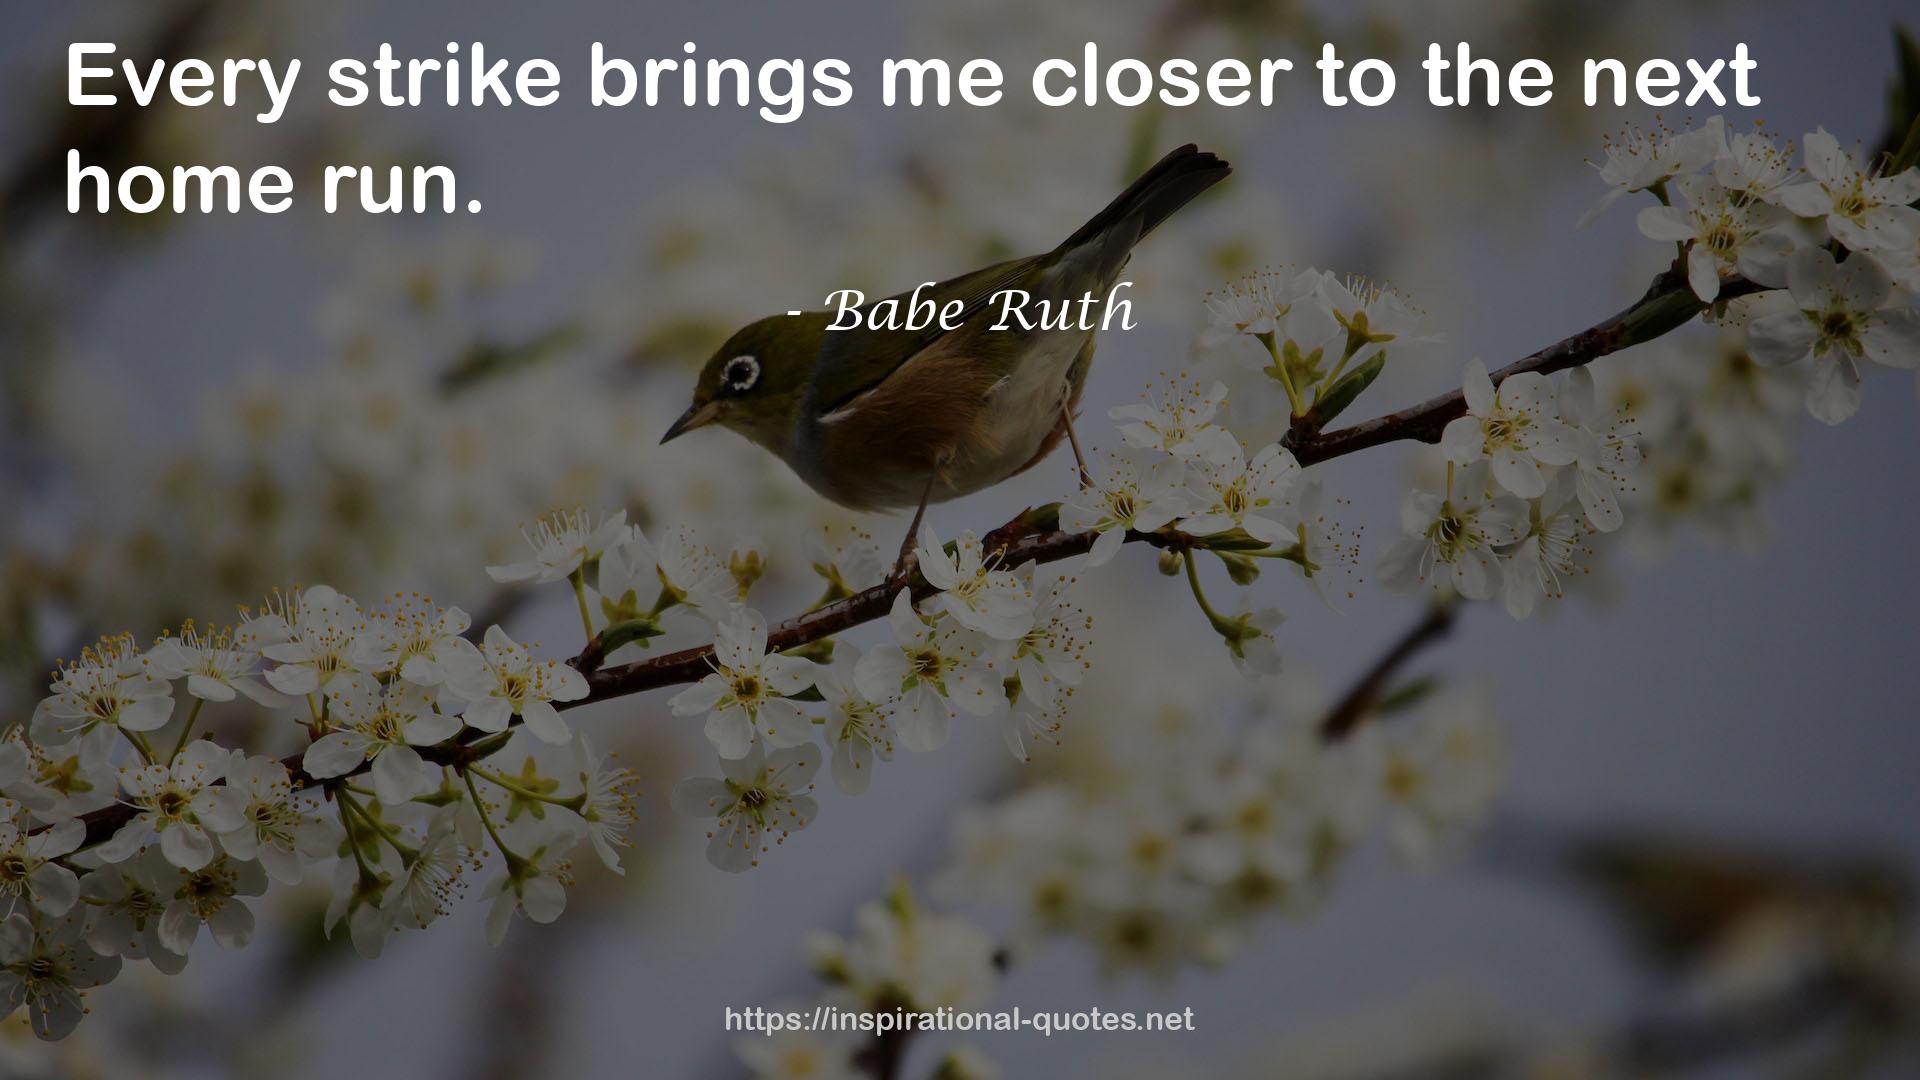 Babe Ruth QUOTES